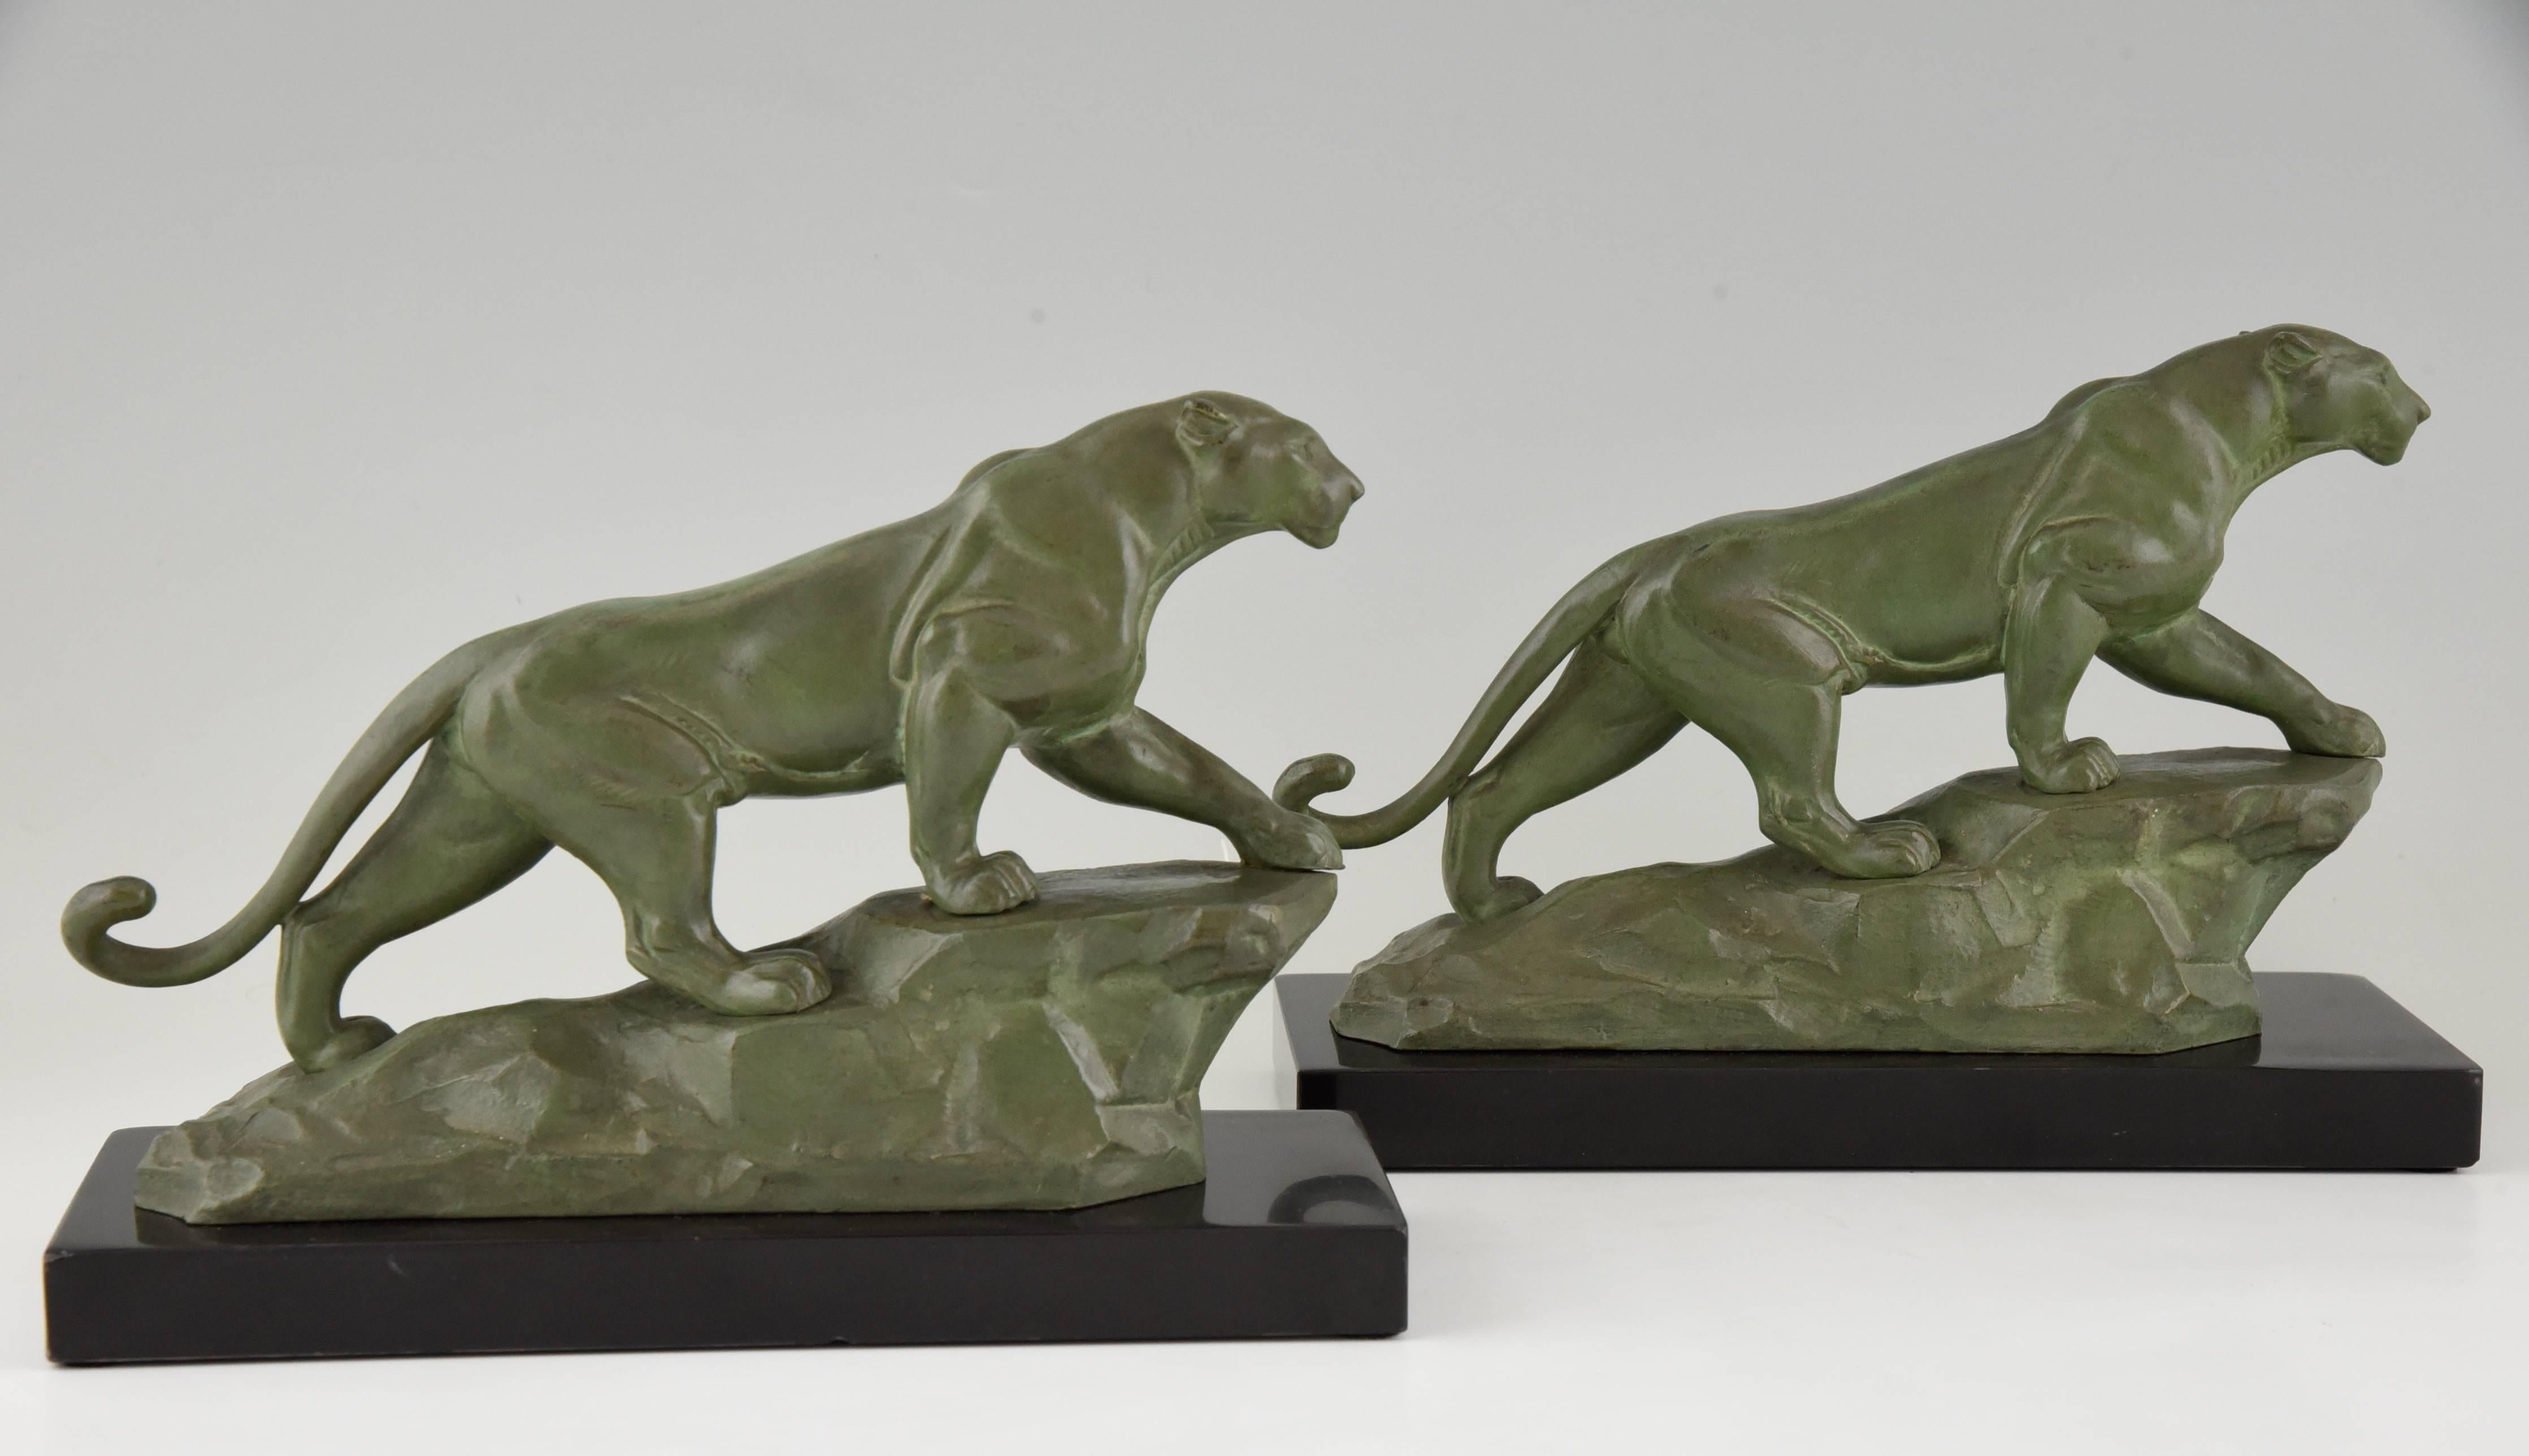 20th Century French Art Deco Panther Bookends by Carvin on Marble Base, 1930